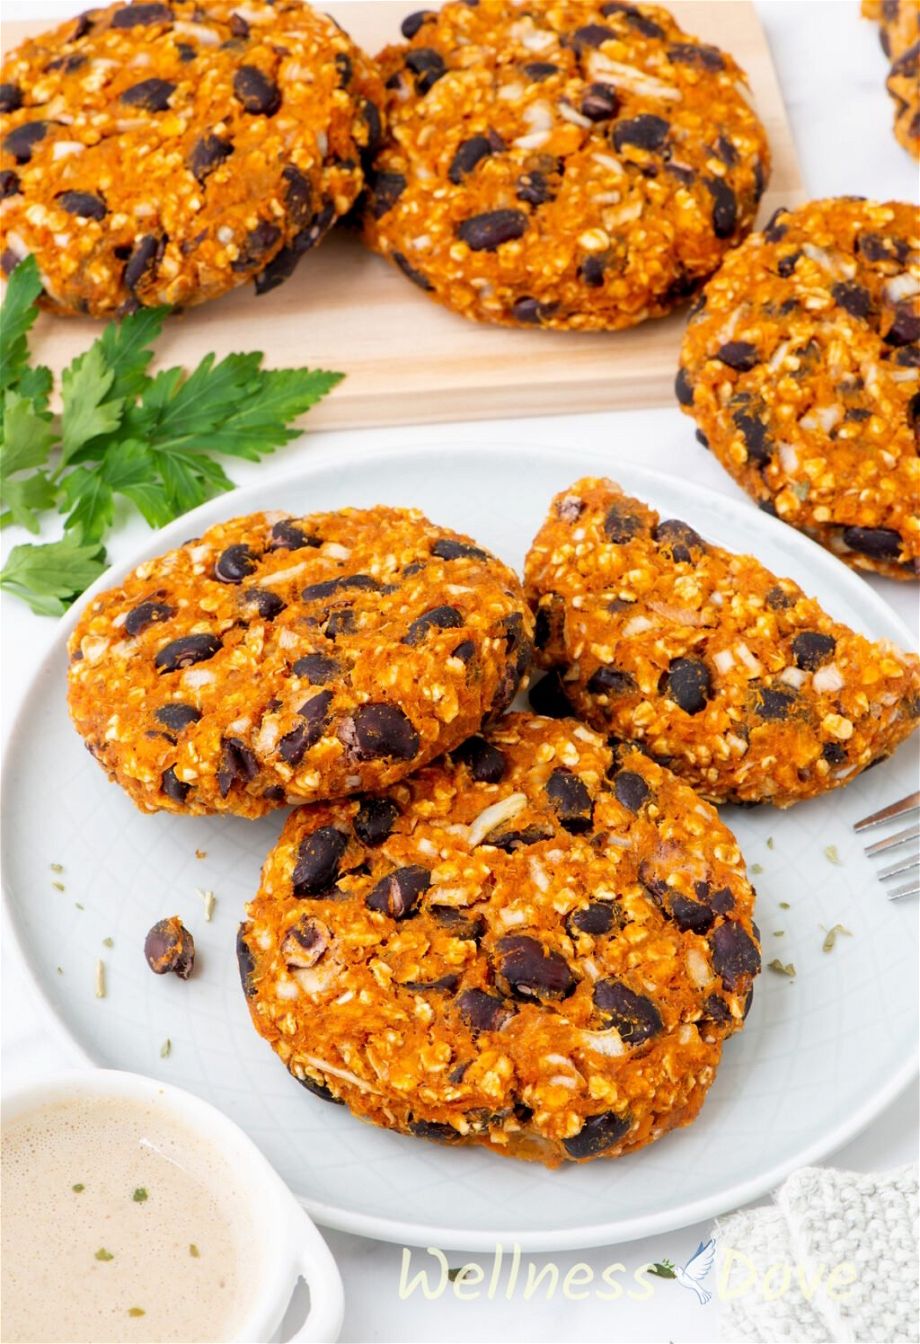 three of the Sweet Potato Black Bean Burgers are in a plate and another three are on a chopping board next to them.